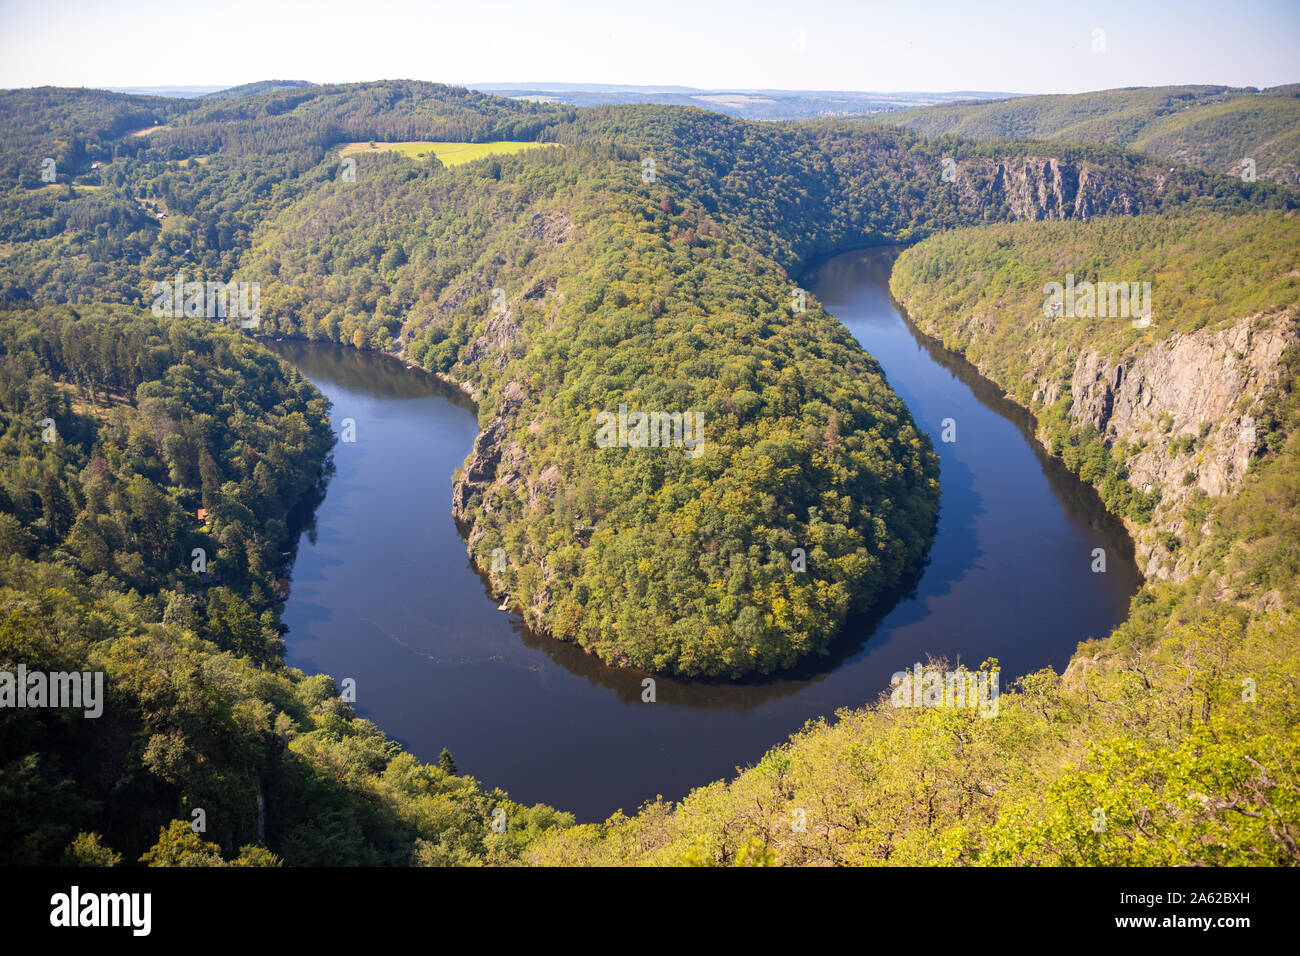 Aerial view of Vltava river horseshoe shape meander from Maj viewpoint in Czech Republic Stock Photo